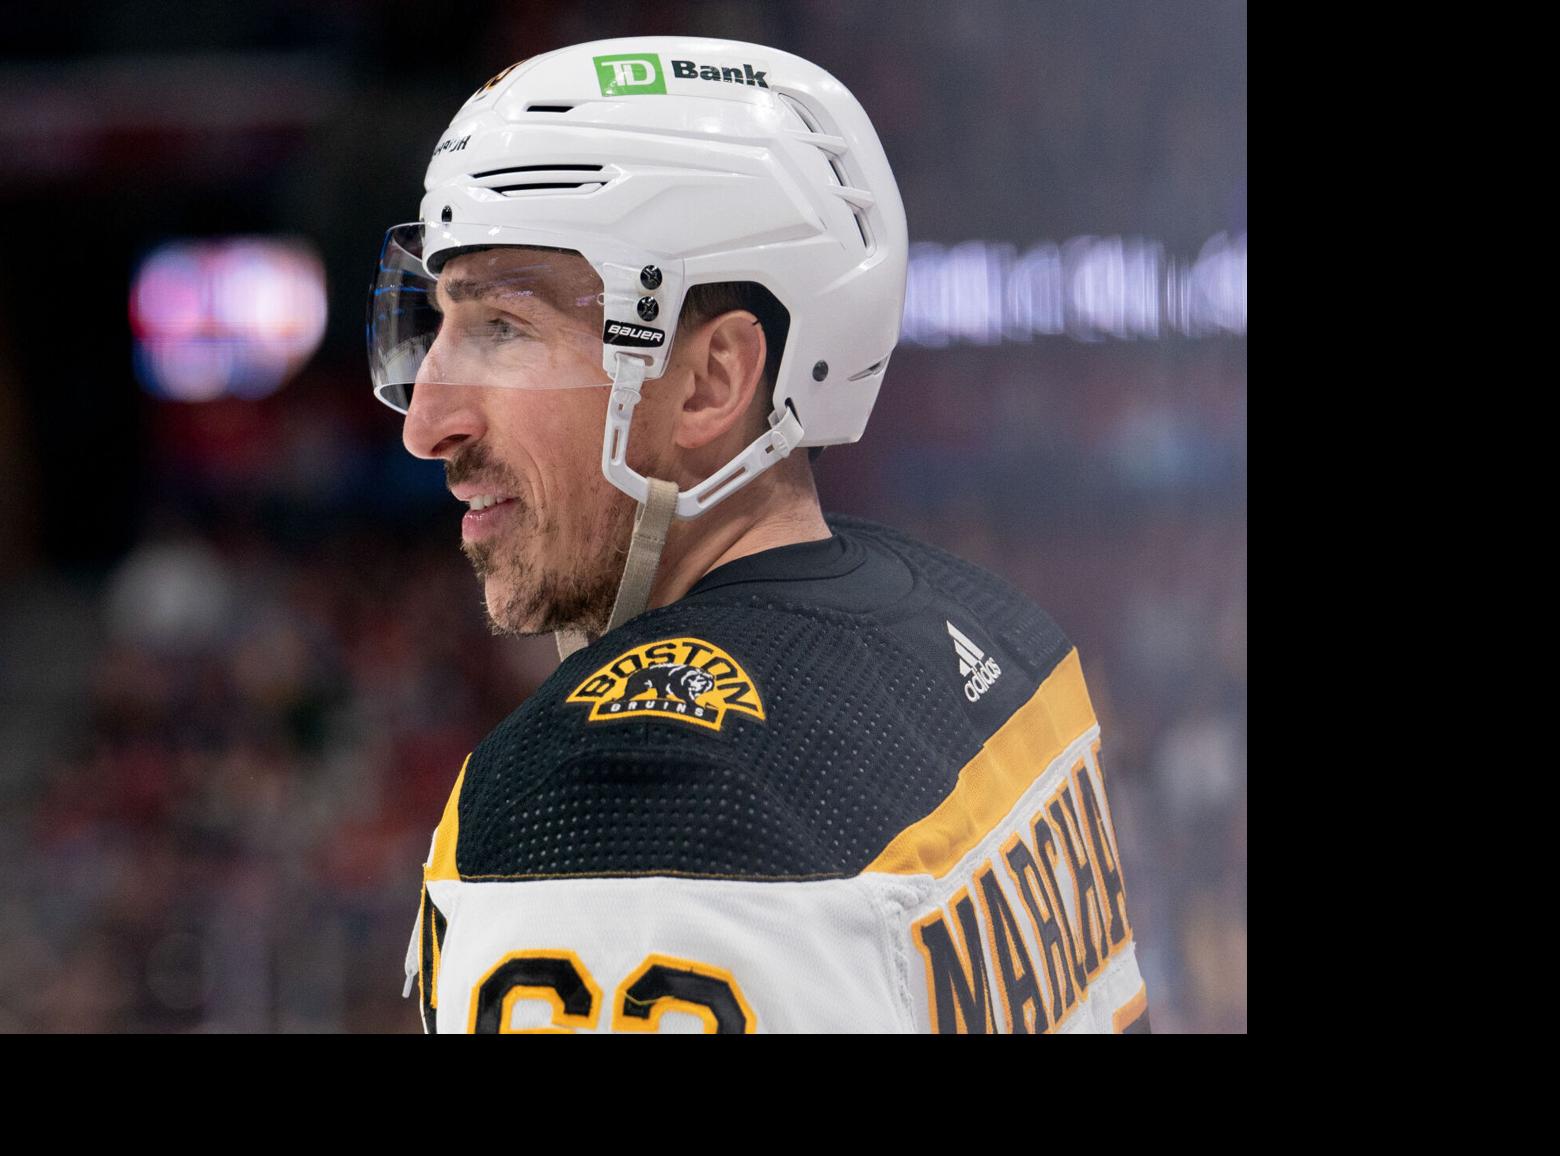 Every Bruins special event uniform and collection (changing Chara